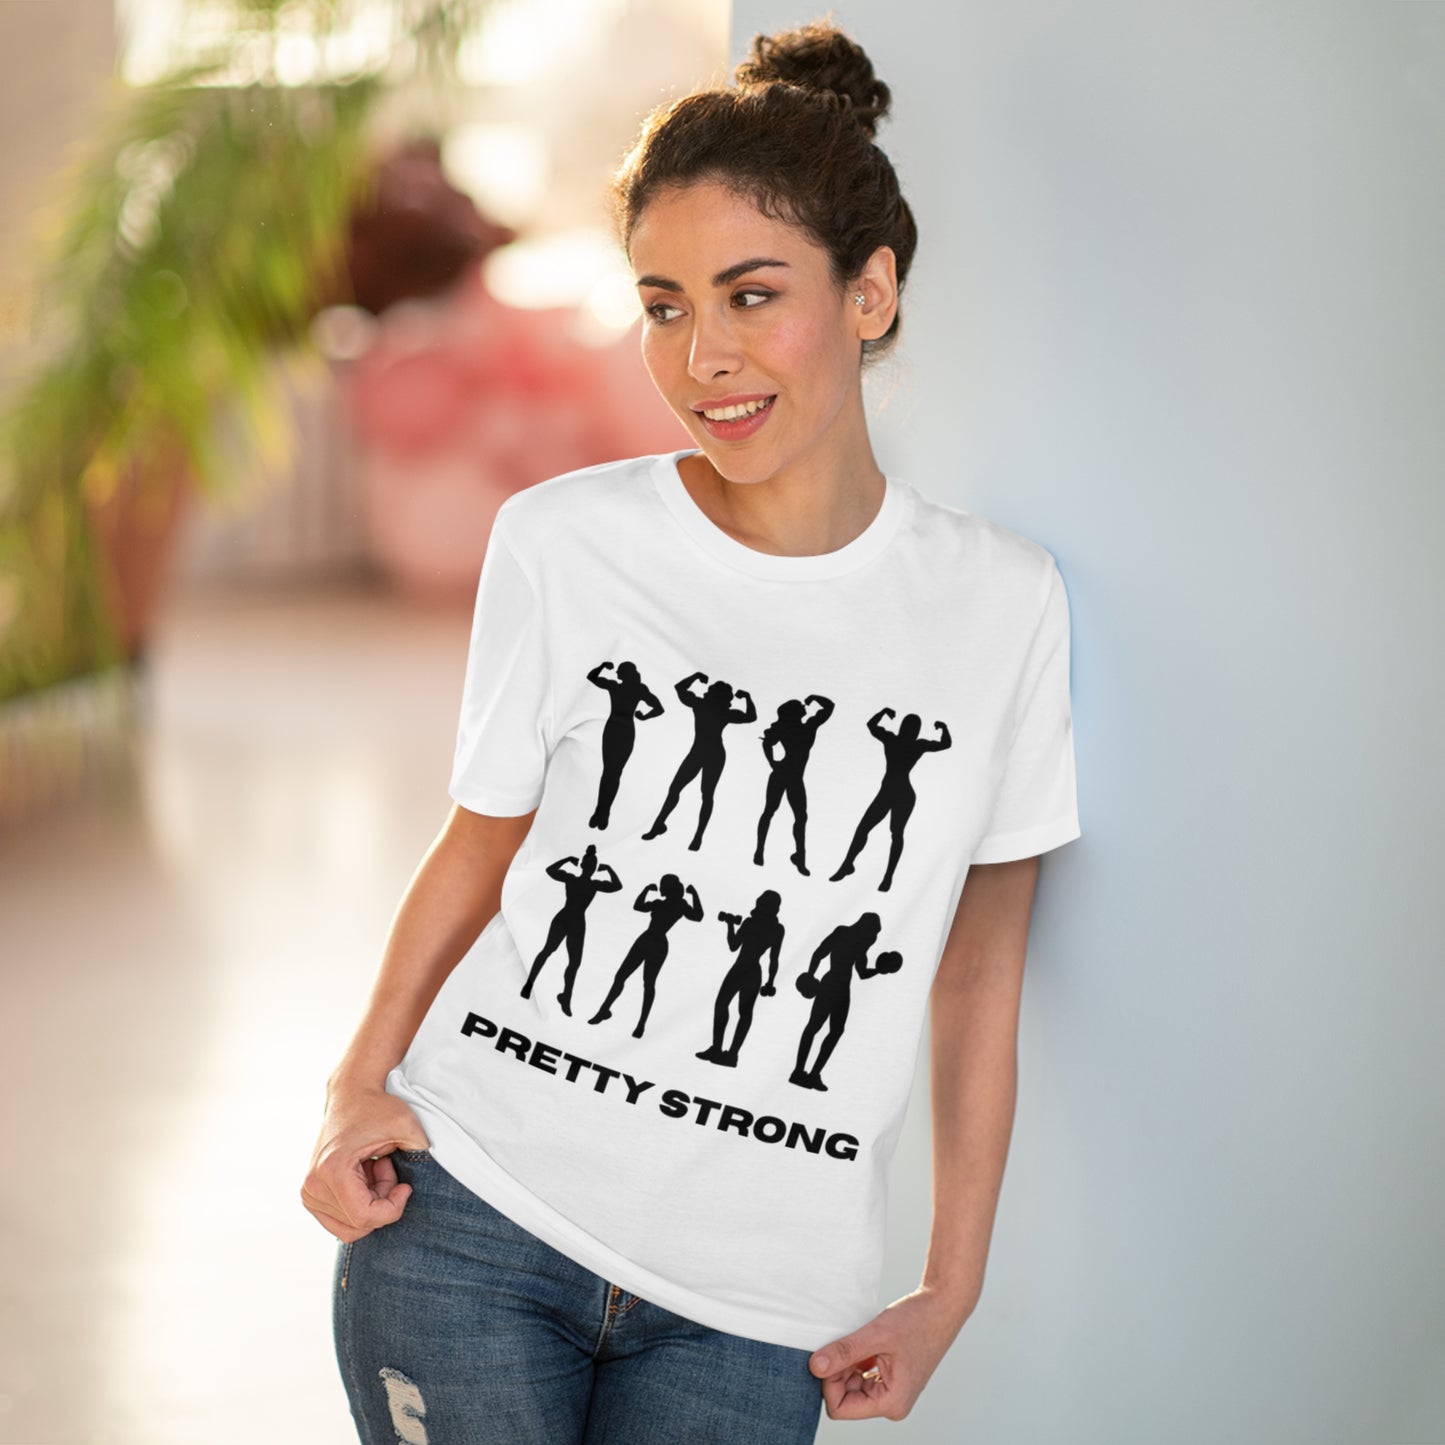 Empower Silhouette Tee "PRETTY STRONG" T-shirt - Unisex